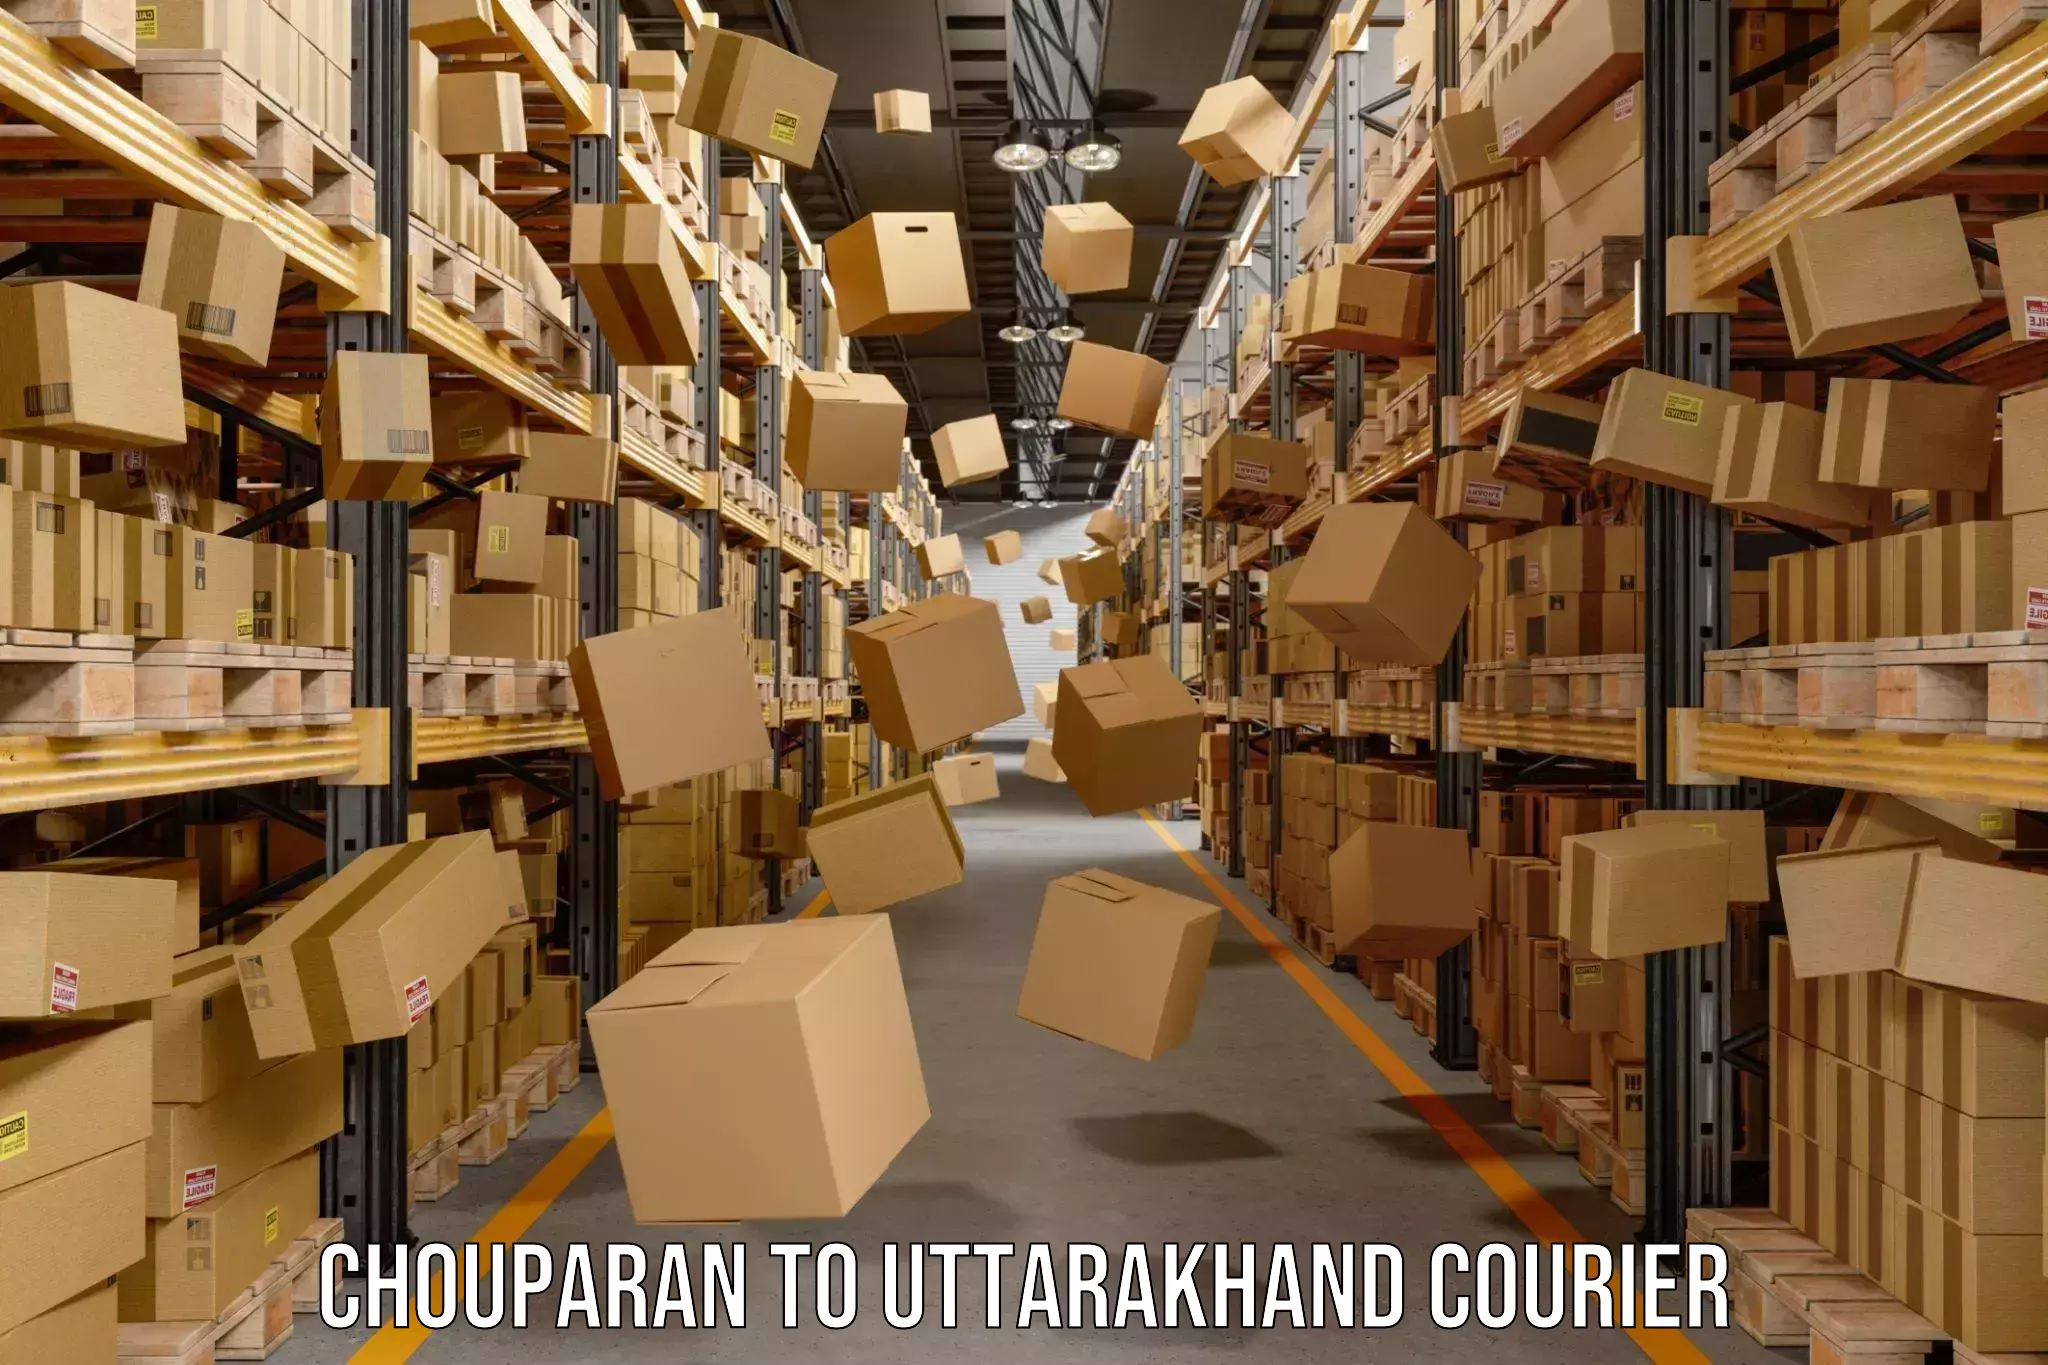 Business delivery service Chouparan to Uttarakhand